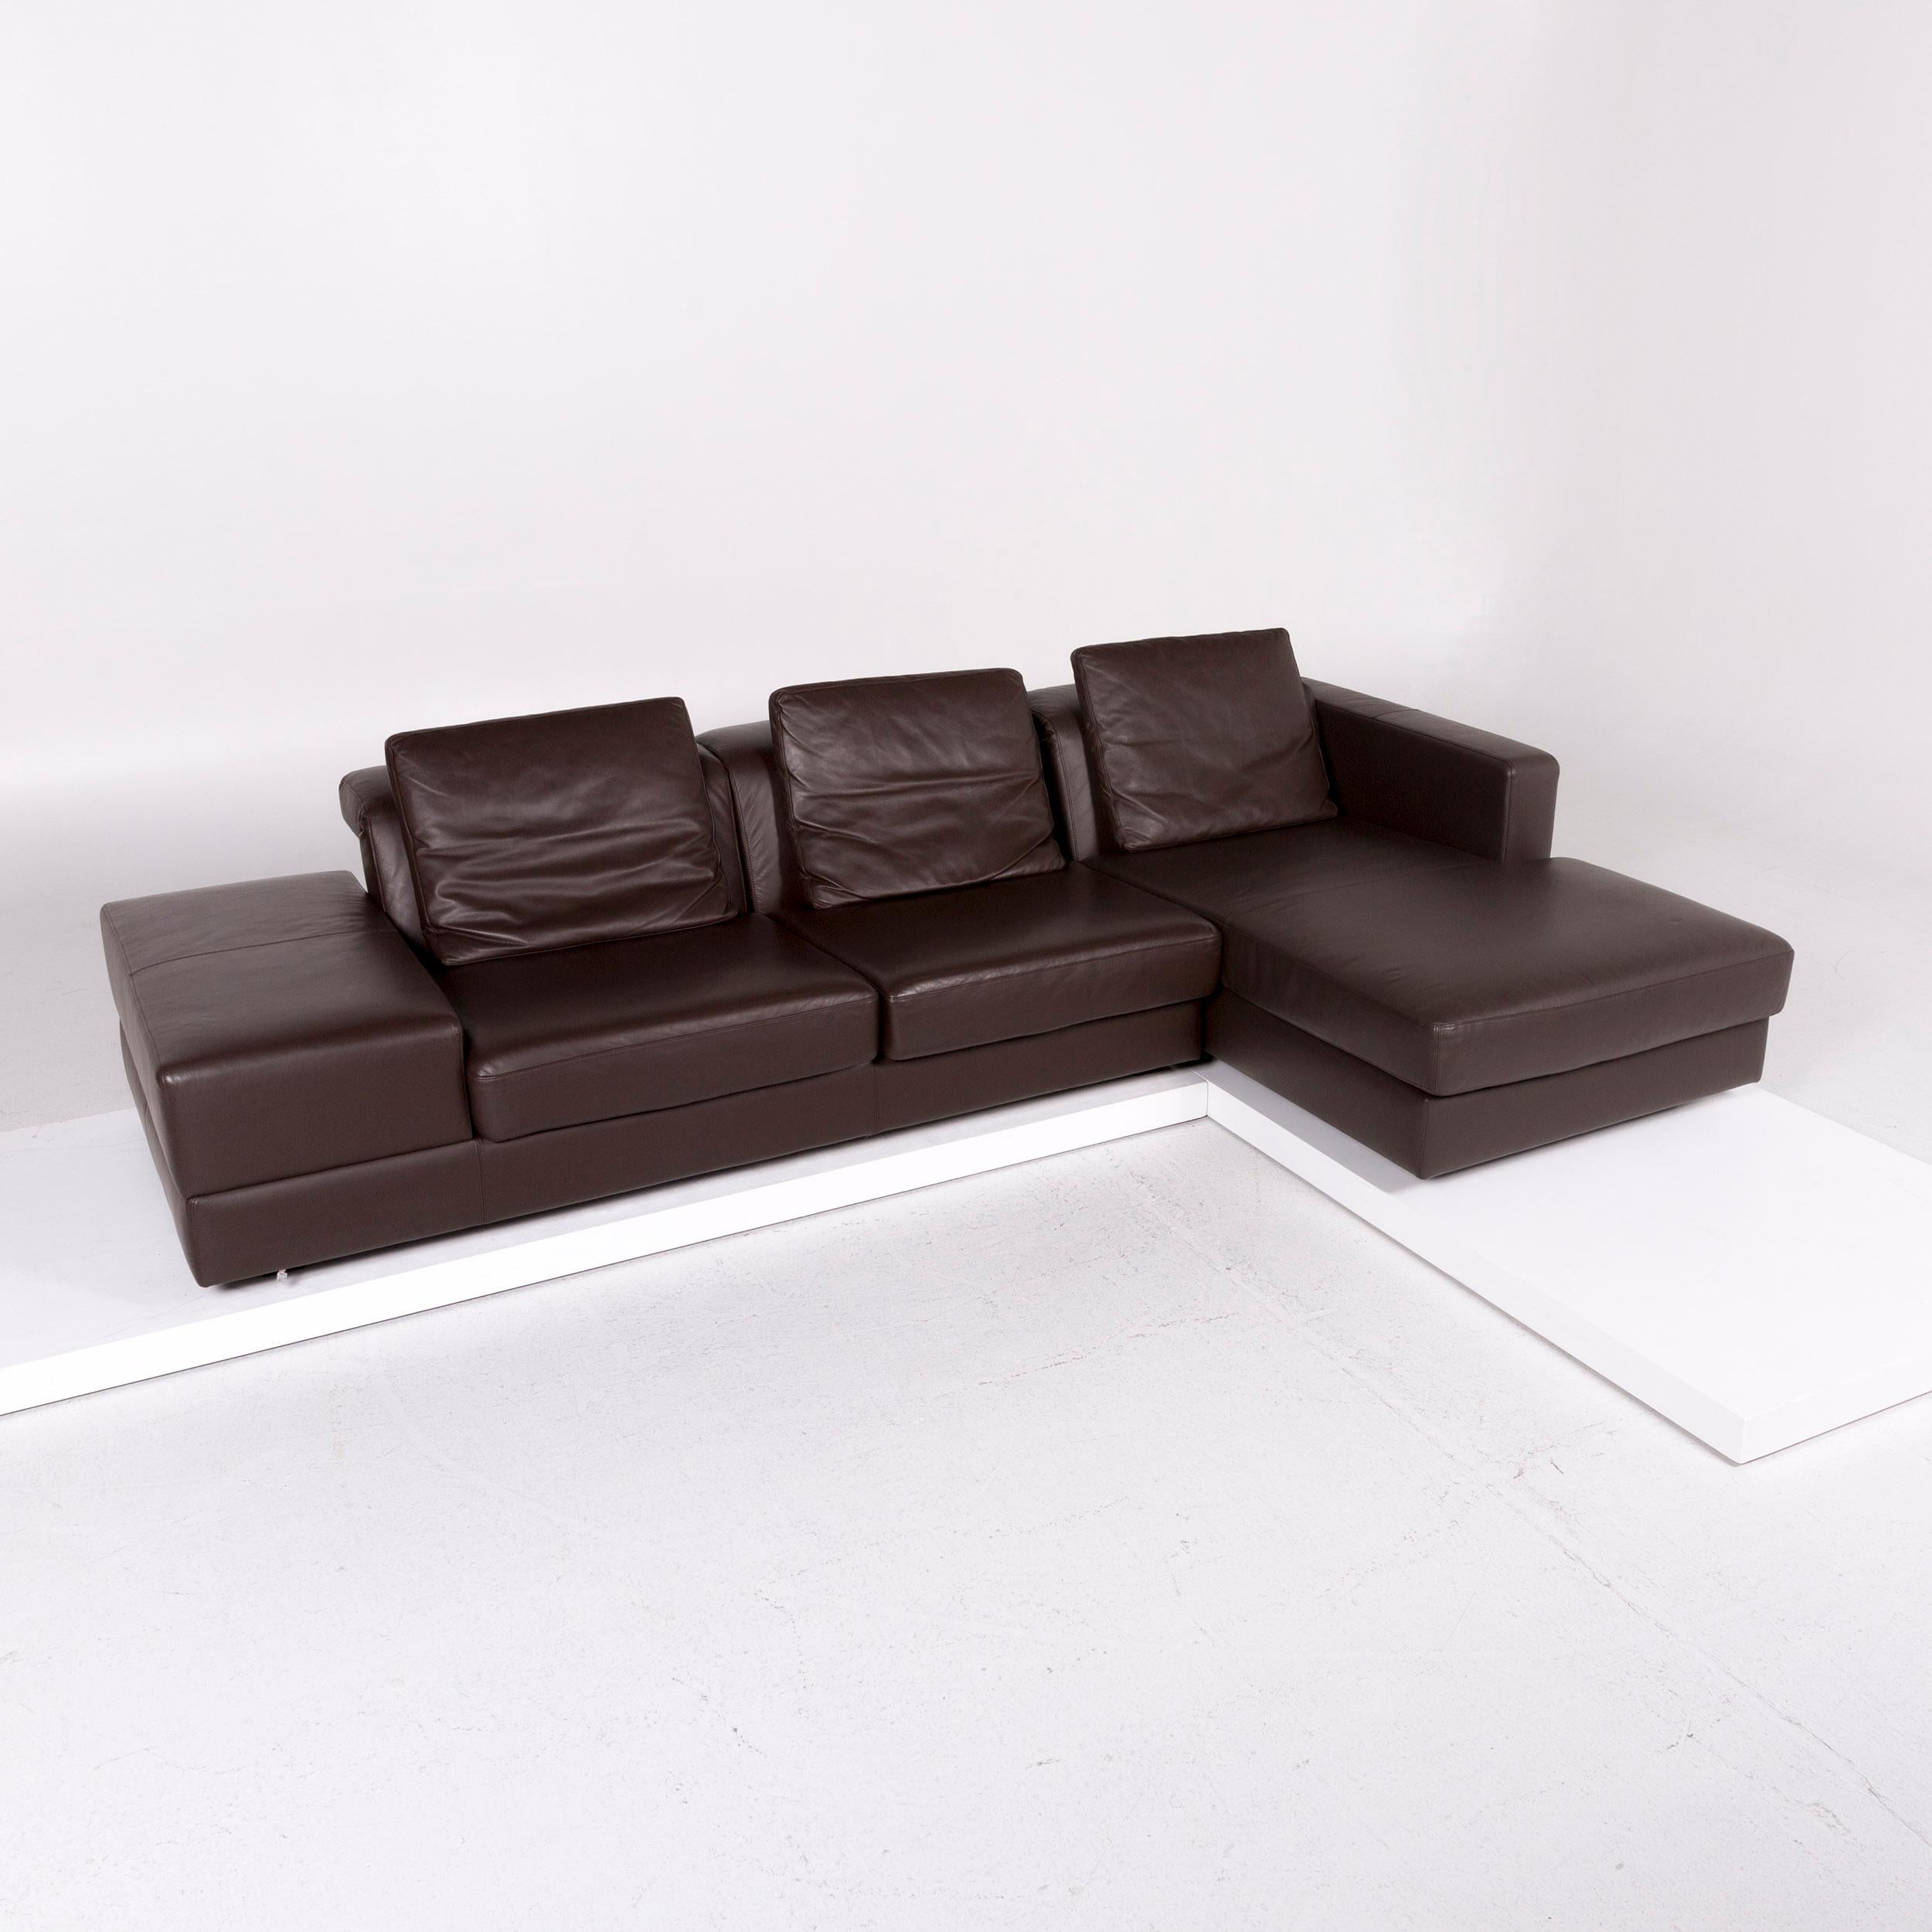 We bring to you a WK Wohnen leather corner sofa brown dark brown sofa couch.
  
 

 Product measurements in centimeters:
 

 Depth 89
Width 292
Height 68
Seat-height 42
Rest-height 47
Seat-depth 68
Seat-width 228
Back-height 27.